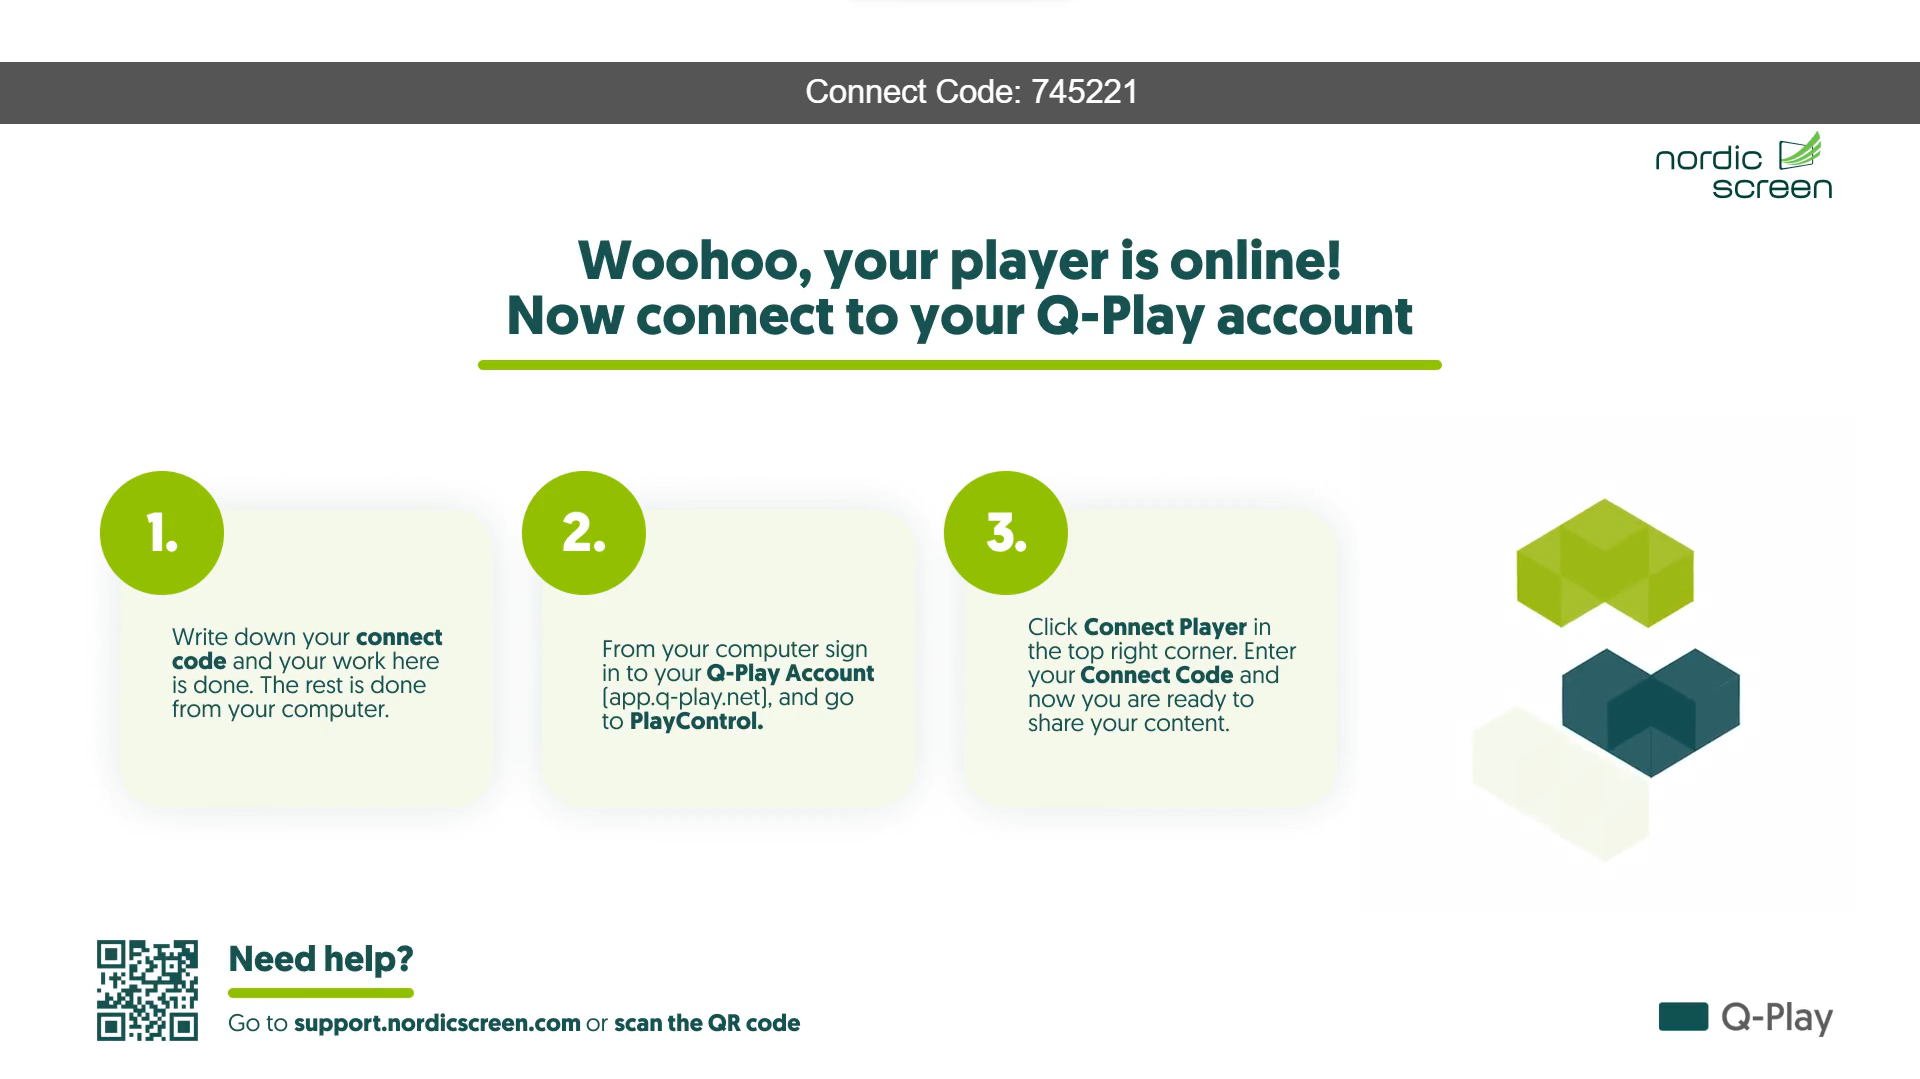 Instruction screen for Q-Play connection with a Connect Code, steps for linking to a Q-Play account, and a QR code for additional help